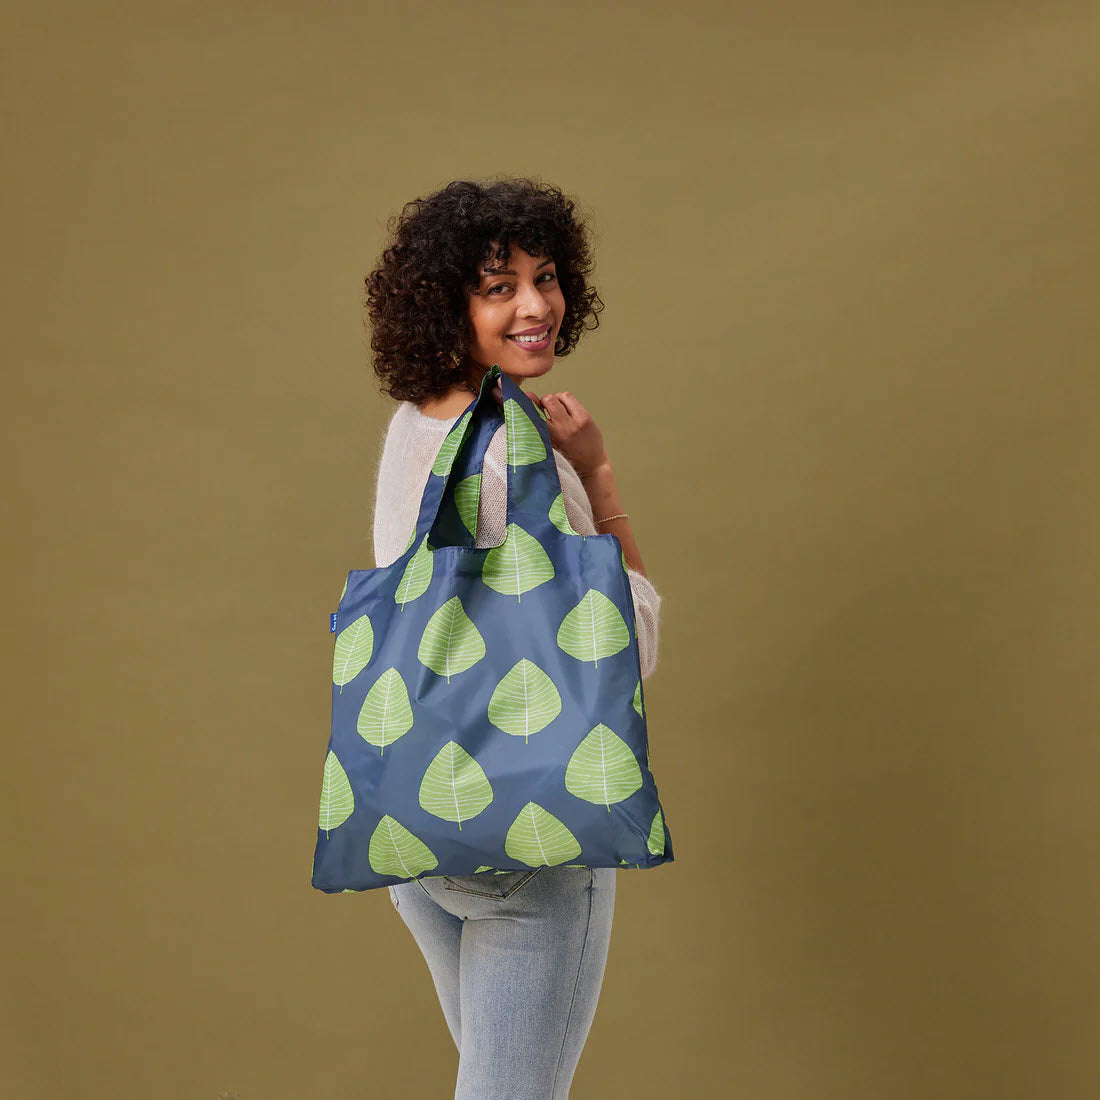 A smiling woman with curly hair holding a Rockflowerpaper BLU BAG ASPEN LEAVES stands against a beige background.